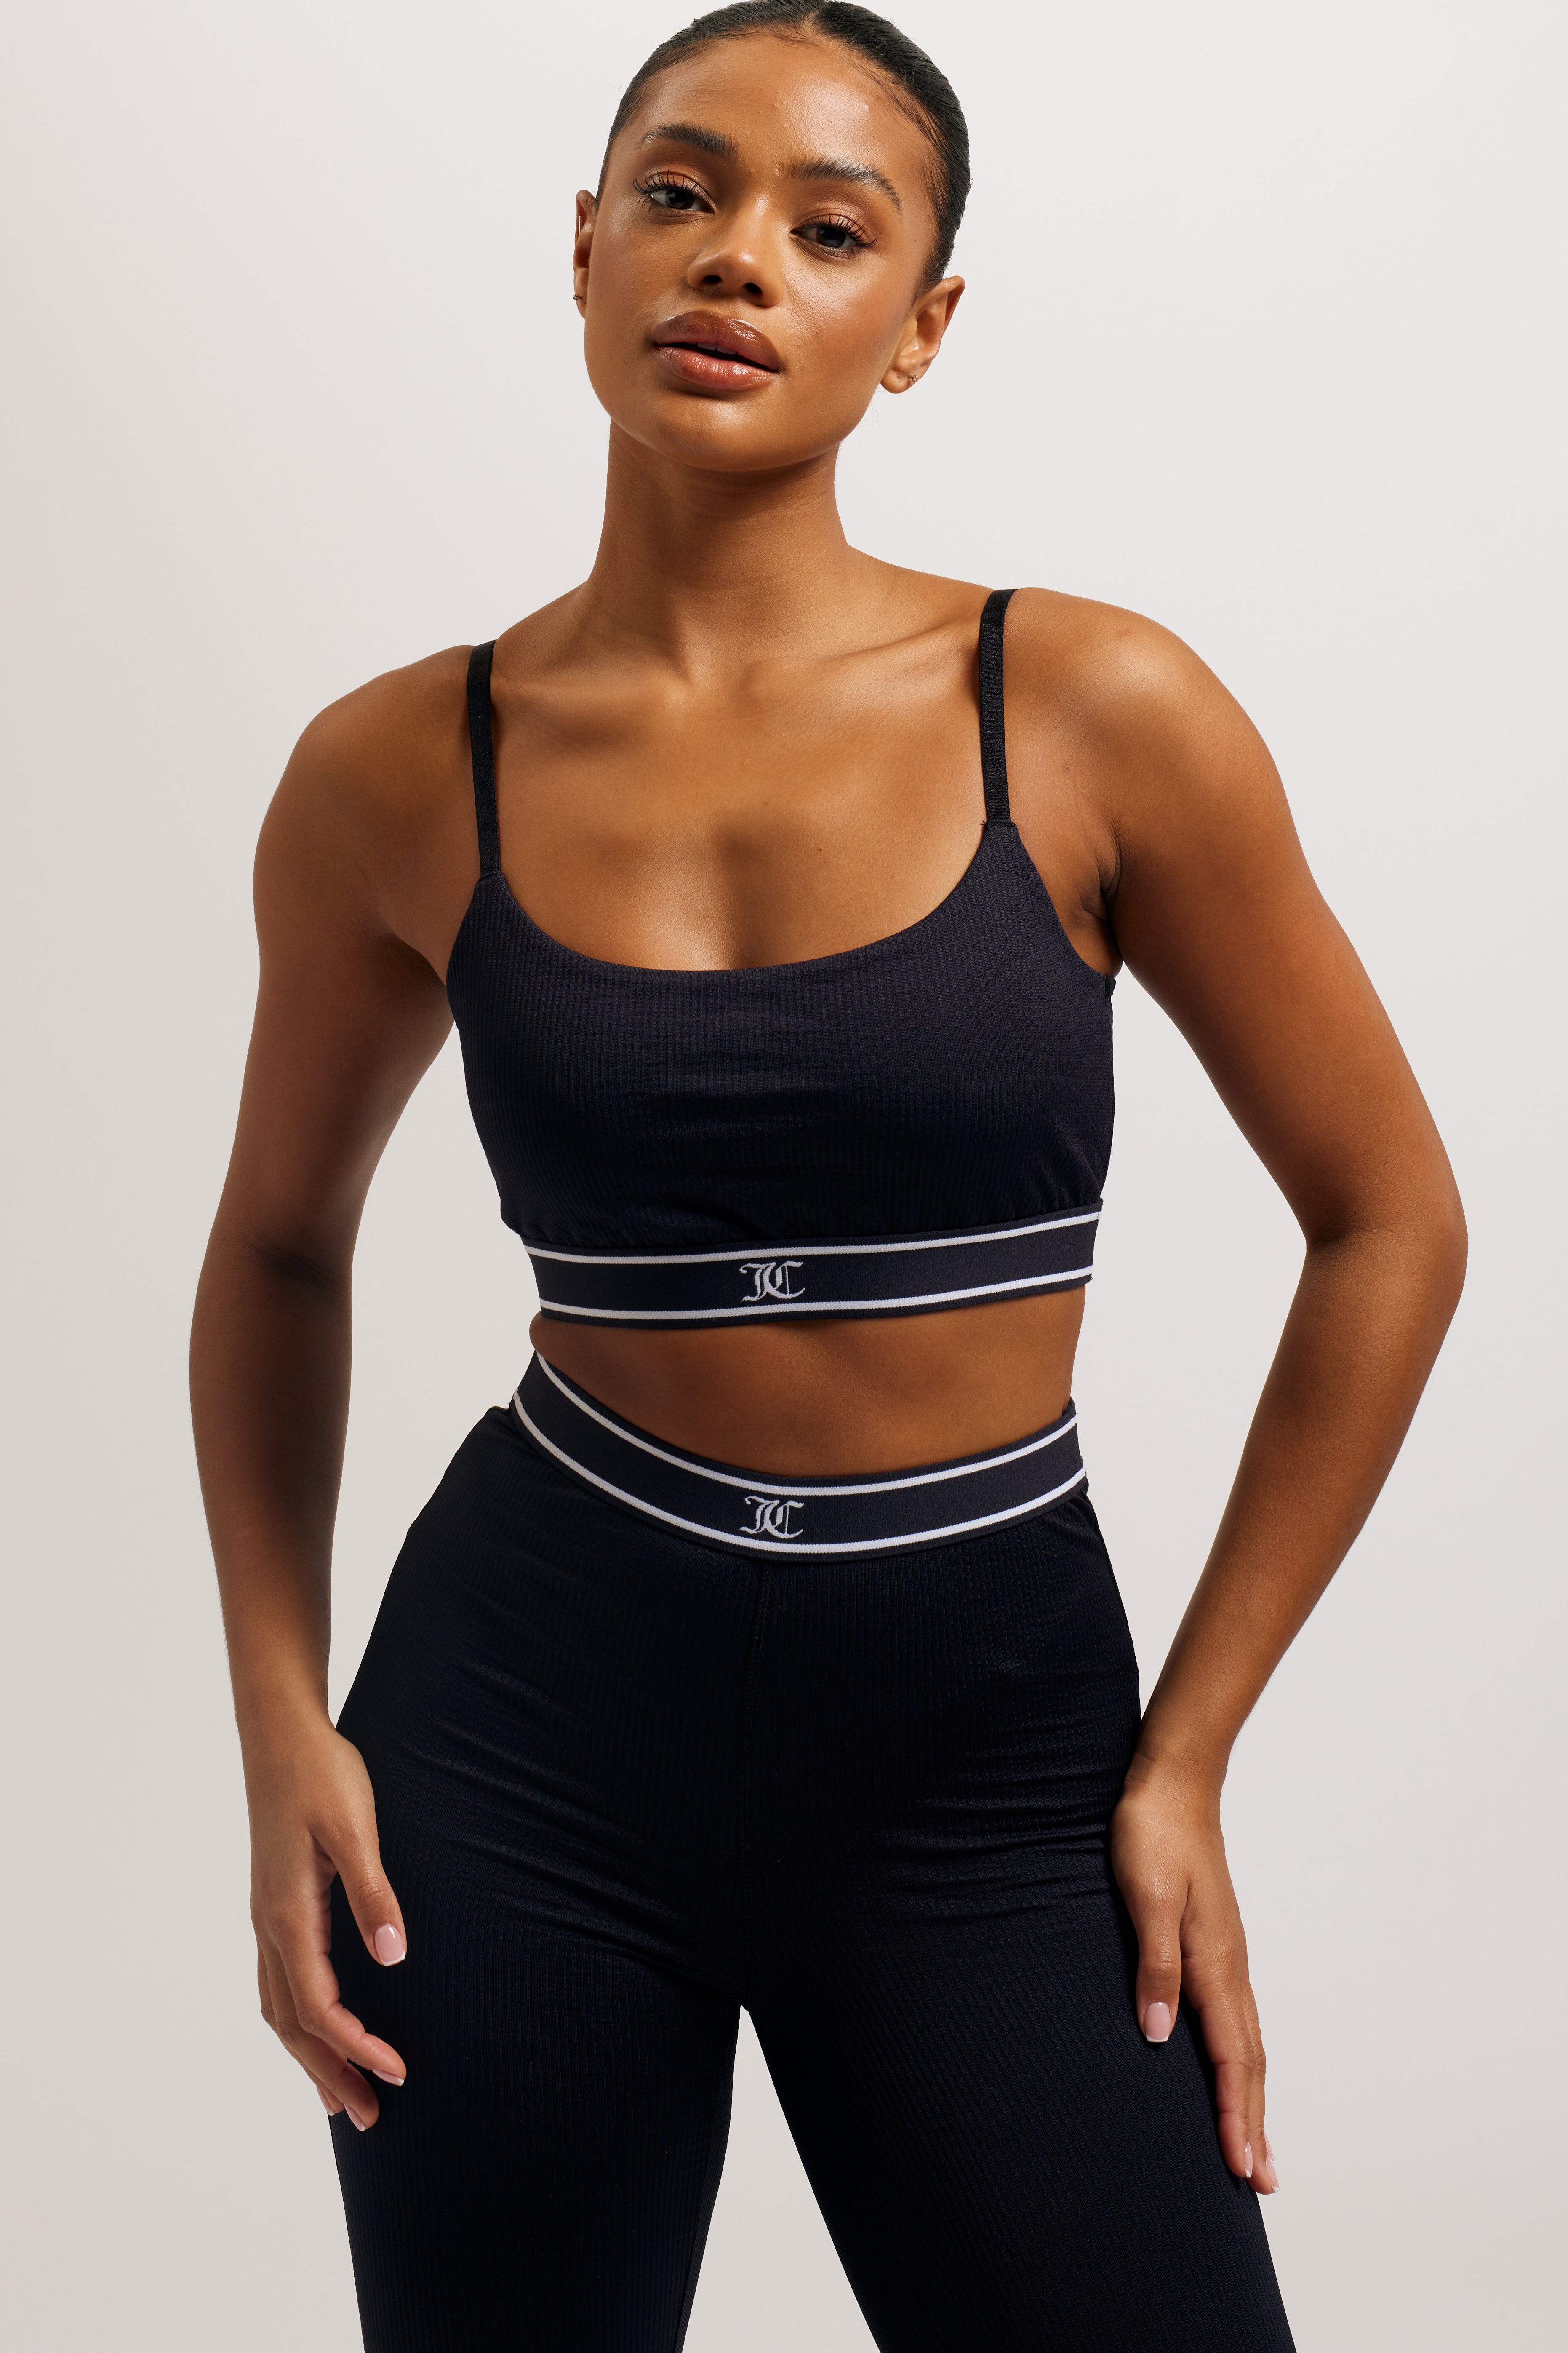 Sports bra (Black) from Juicy Couture